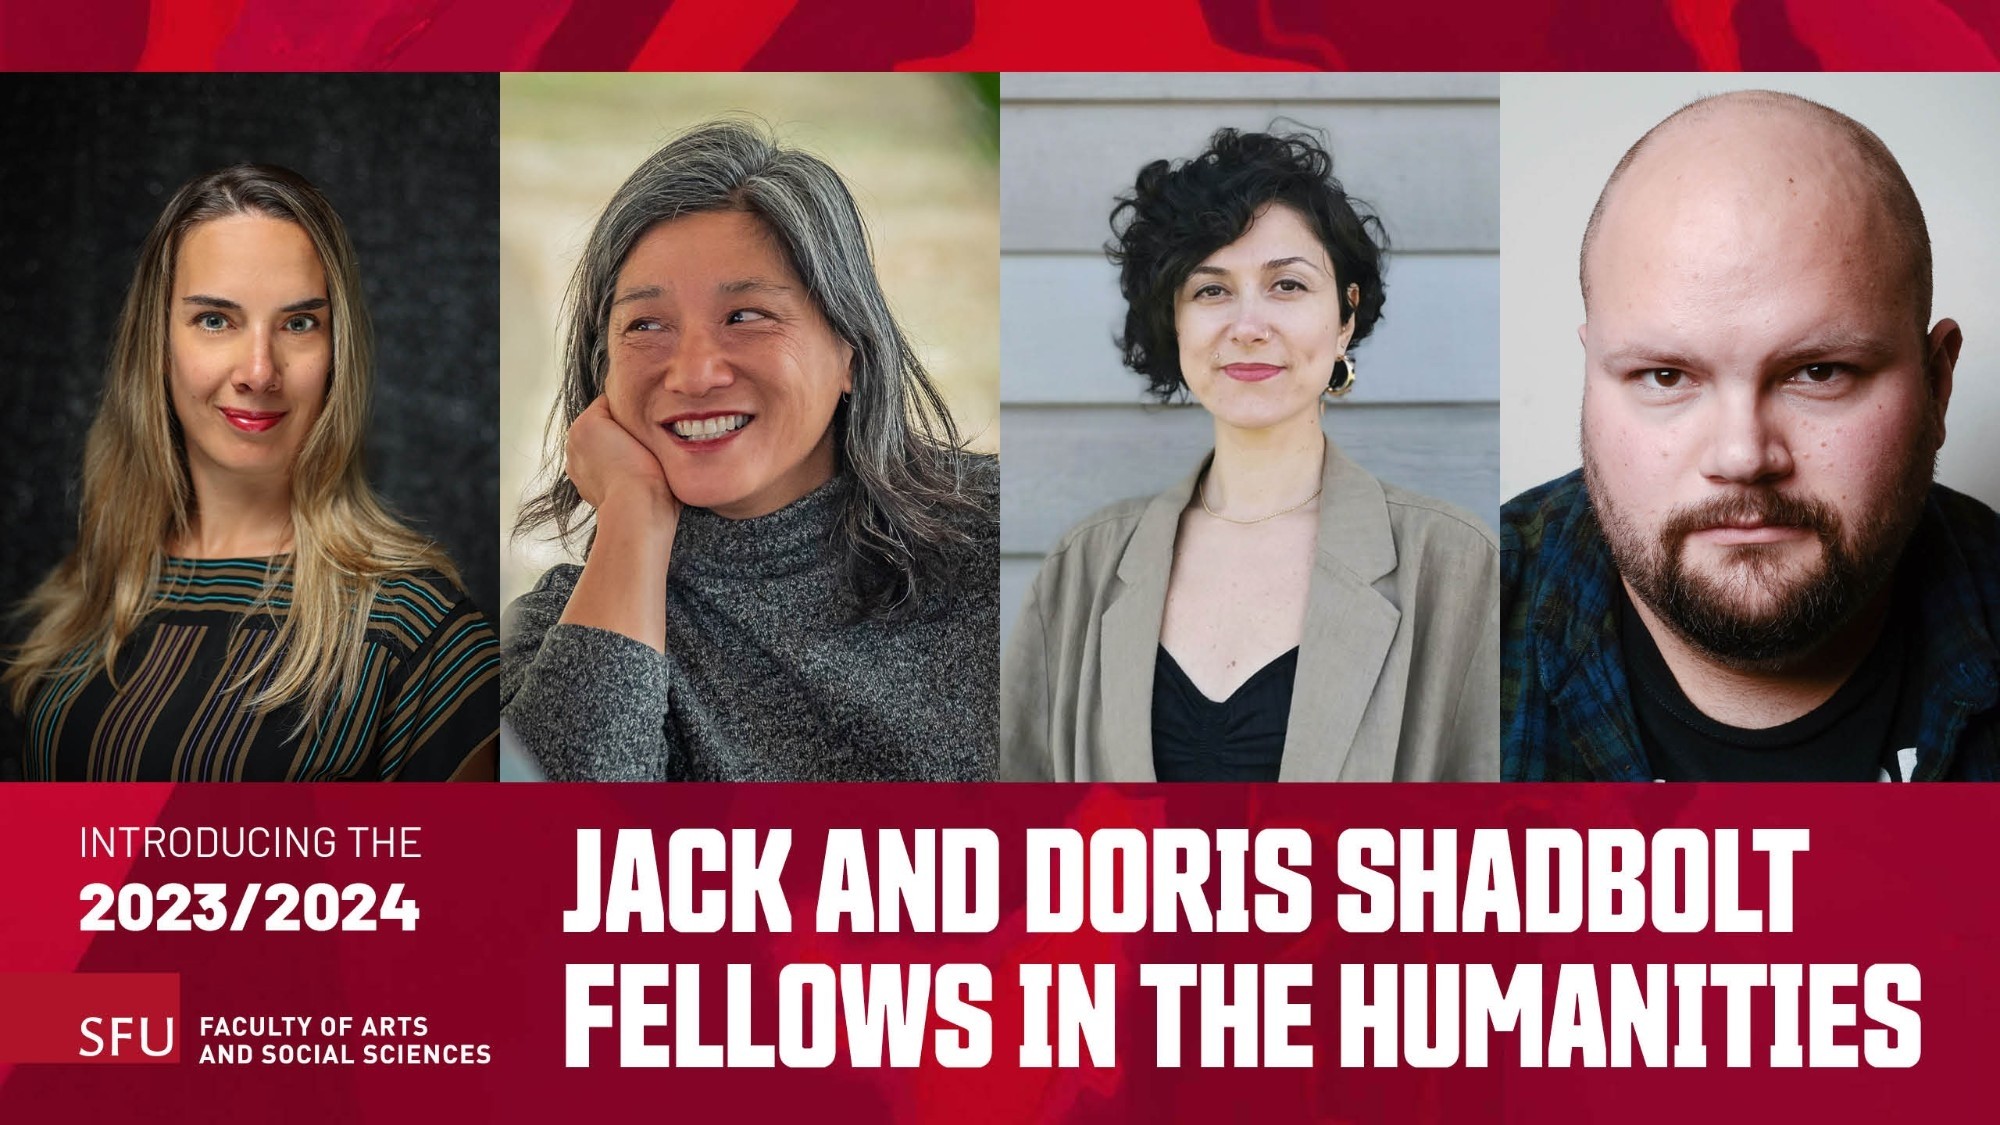 Introducing The 2023/2024 SFU Faculty of Arts and Social Sciences Jack and Doris Shadbolt Fellows in the Humanities